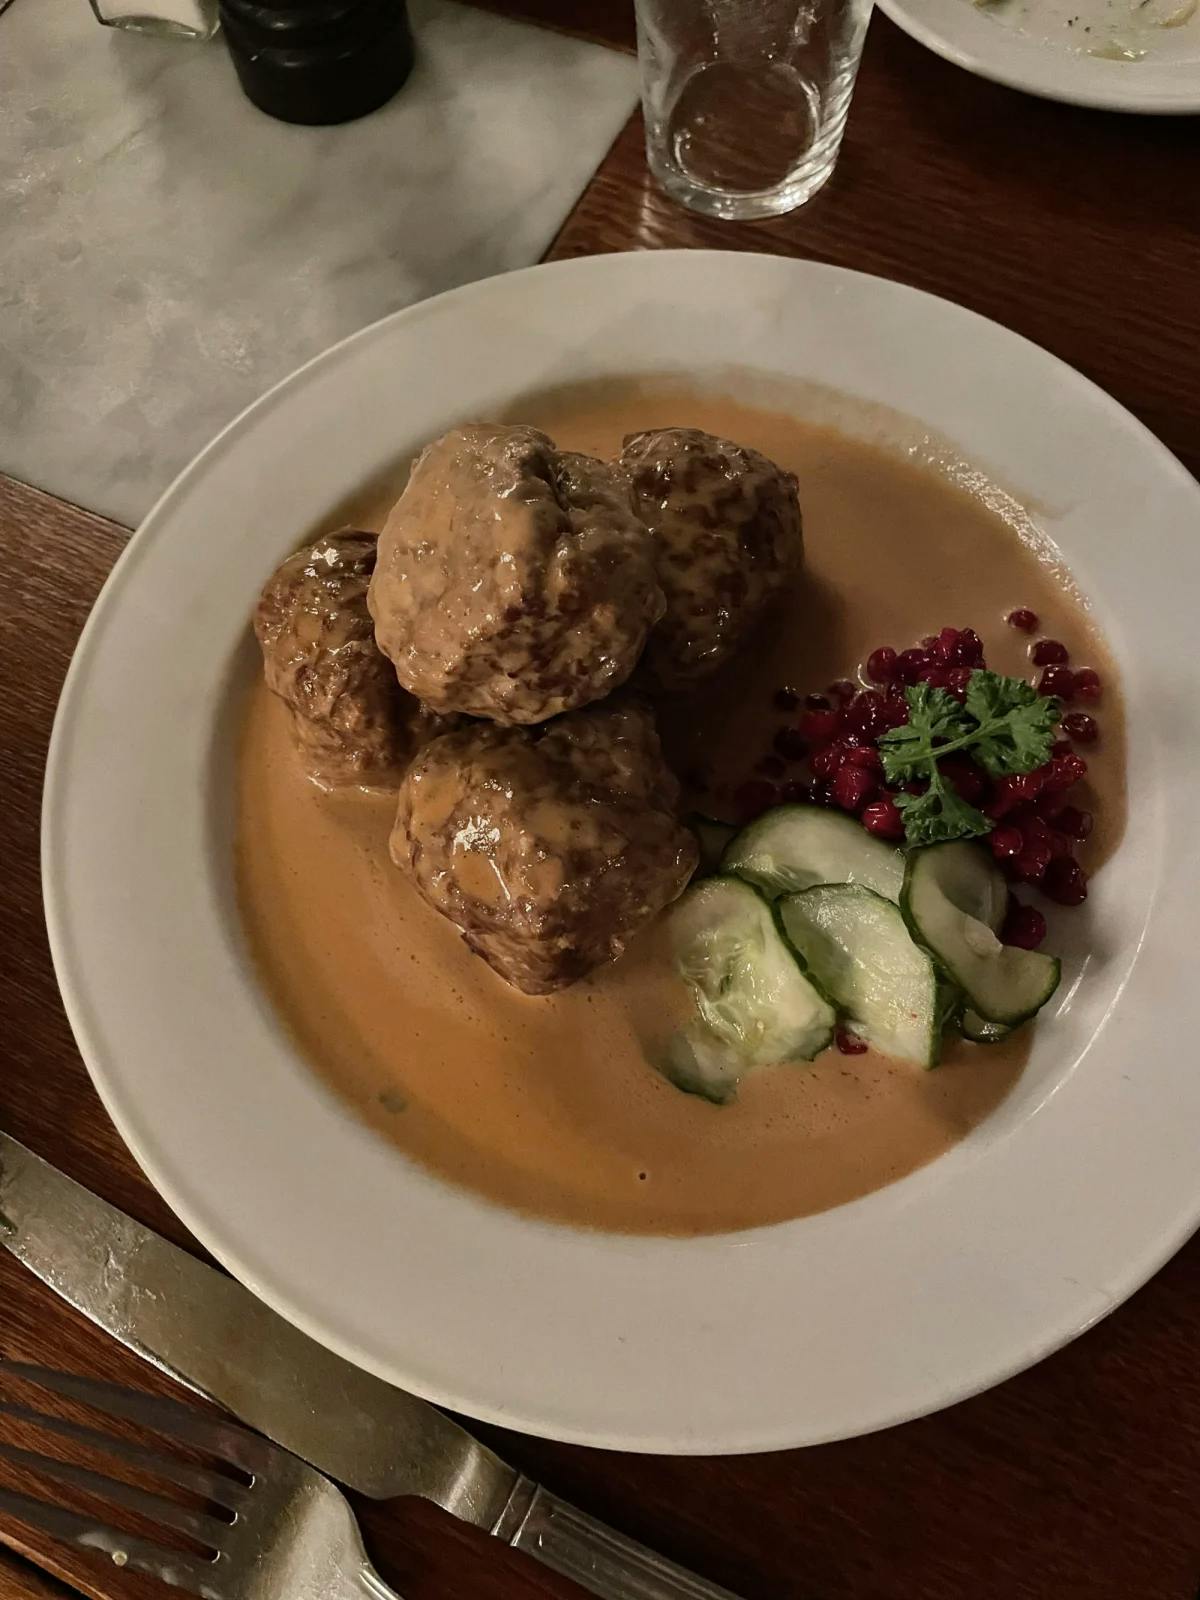 Meatballs in a sauce on a white plate